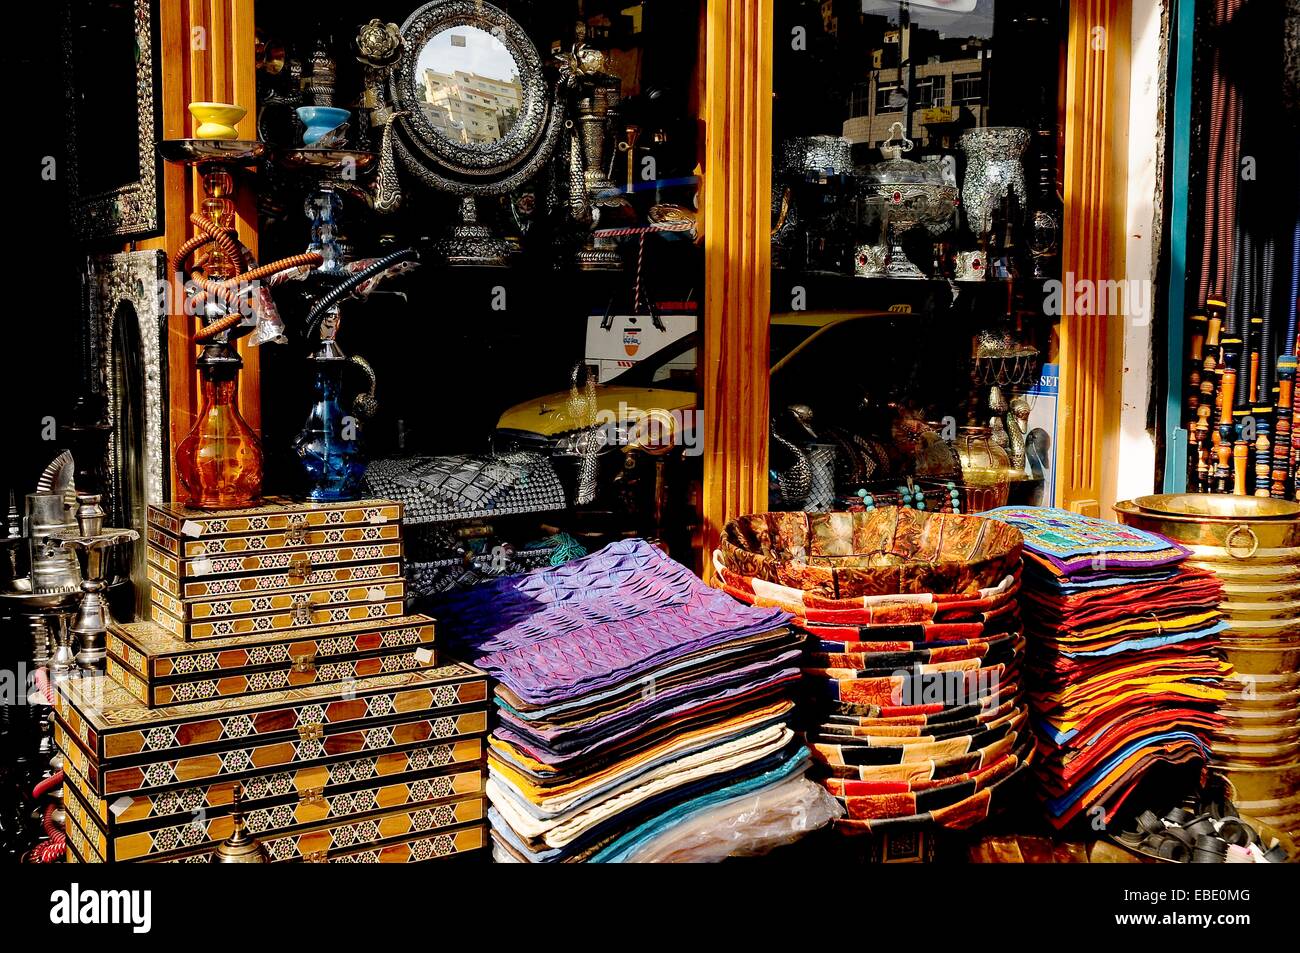 where to buy souvenirs in amman